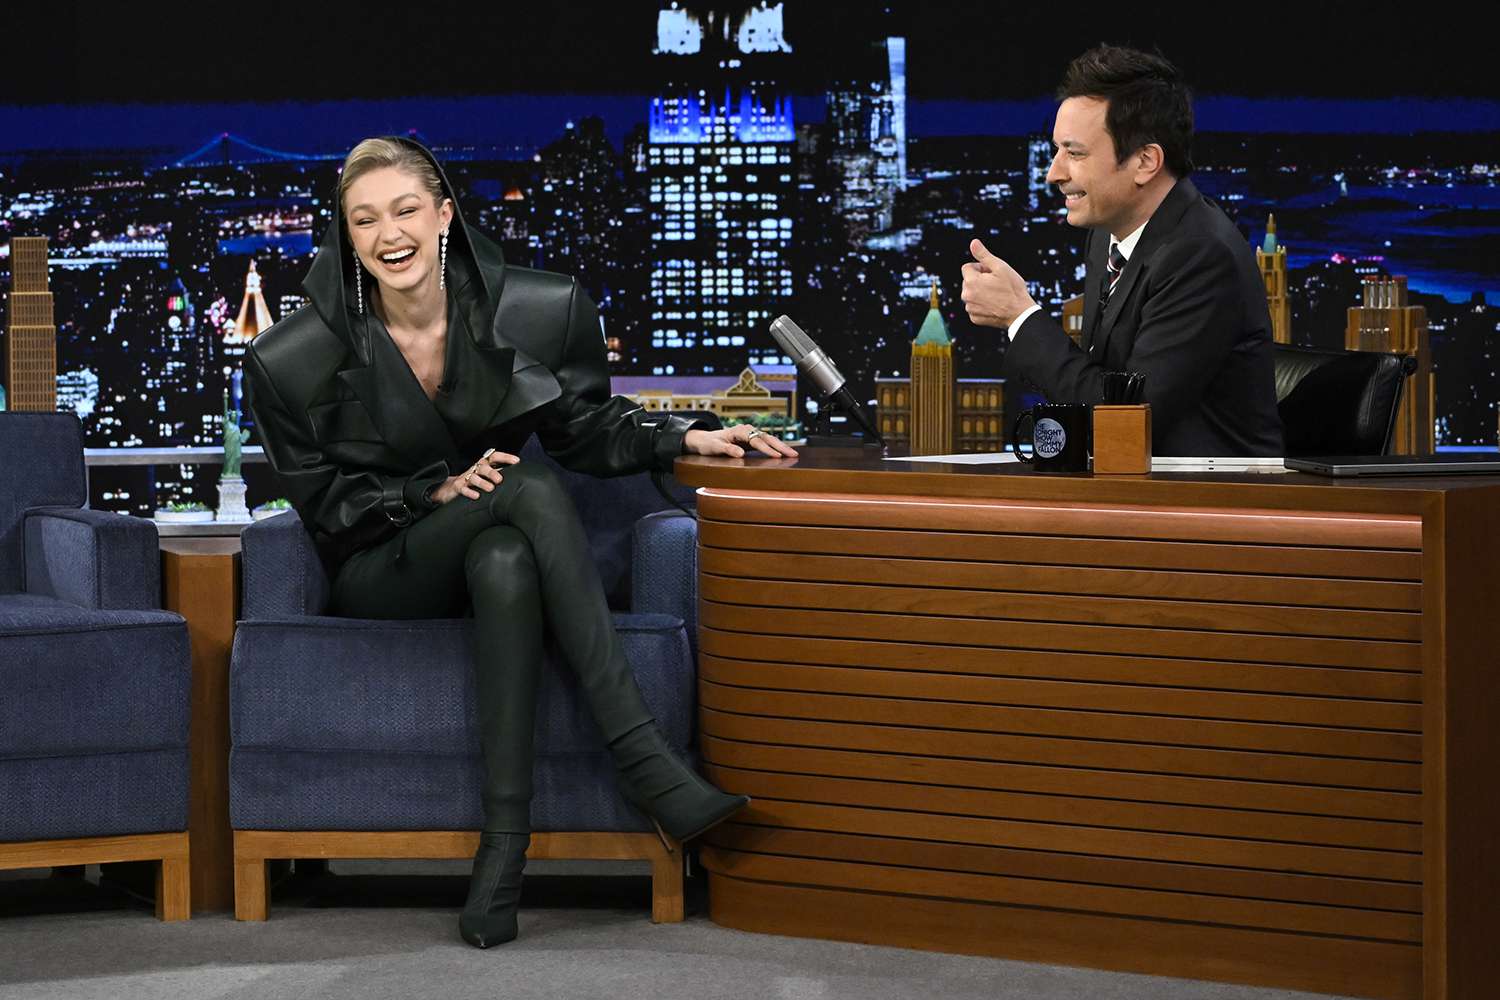 Gigi Hadid during an interview with host Jimmy Fallon